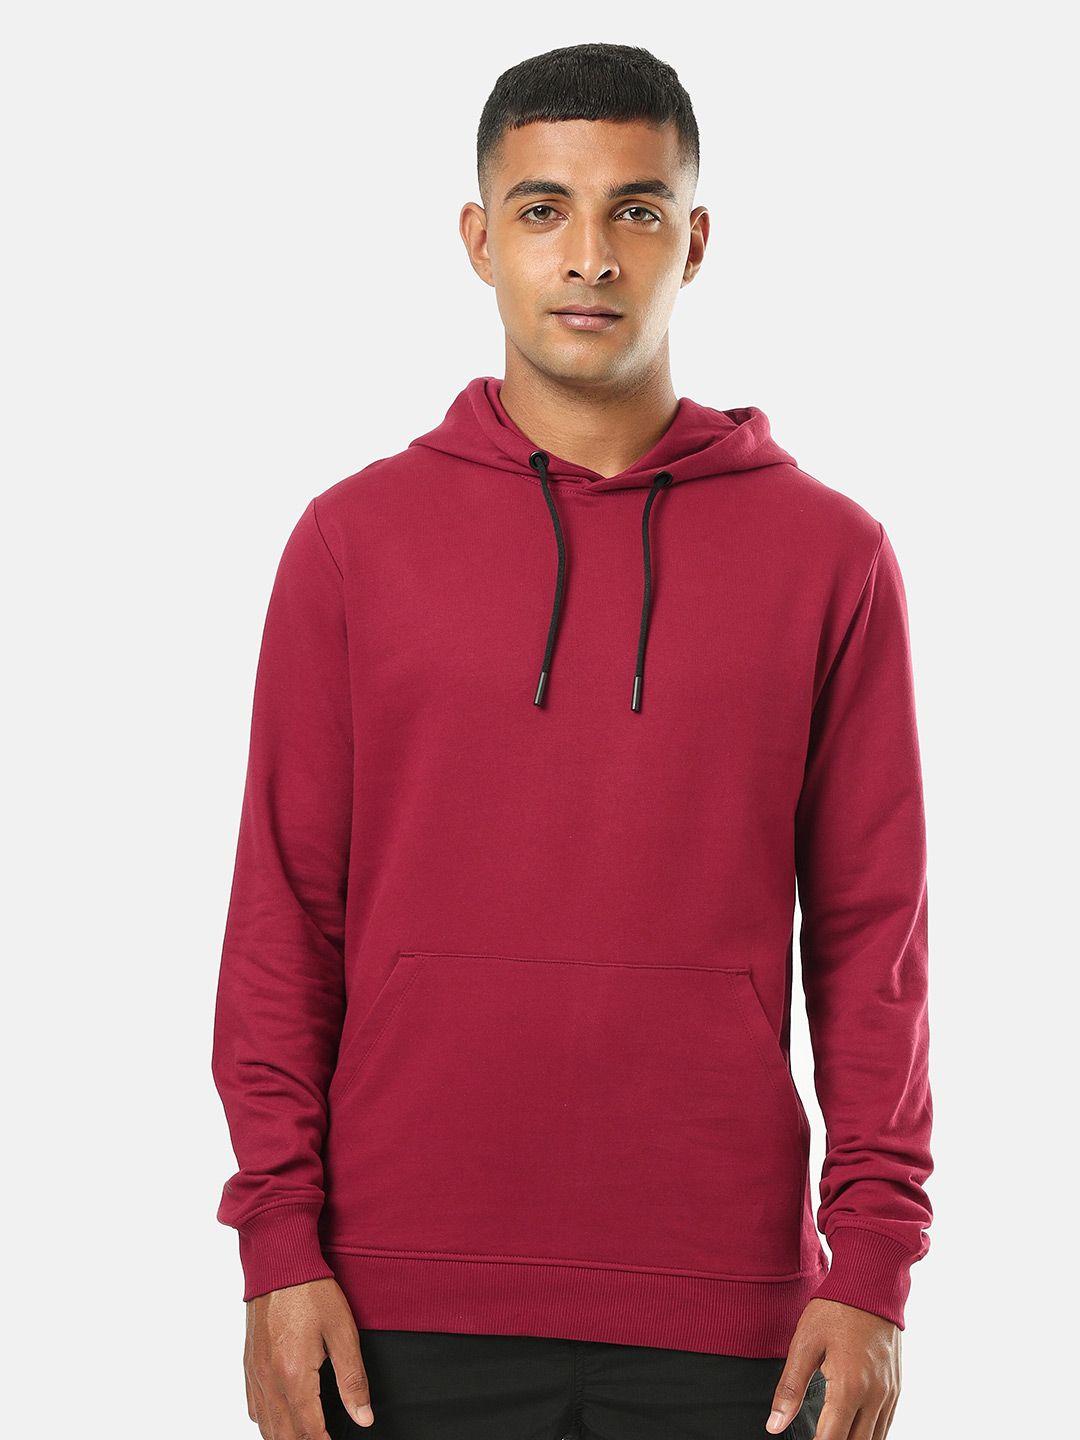 cultsport hooded long sleeves sports pullover